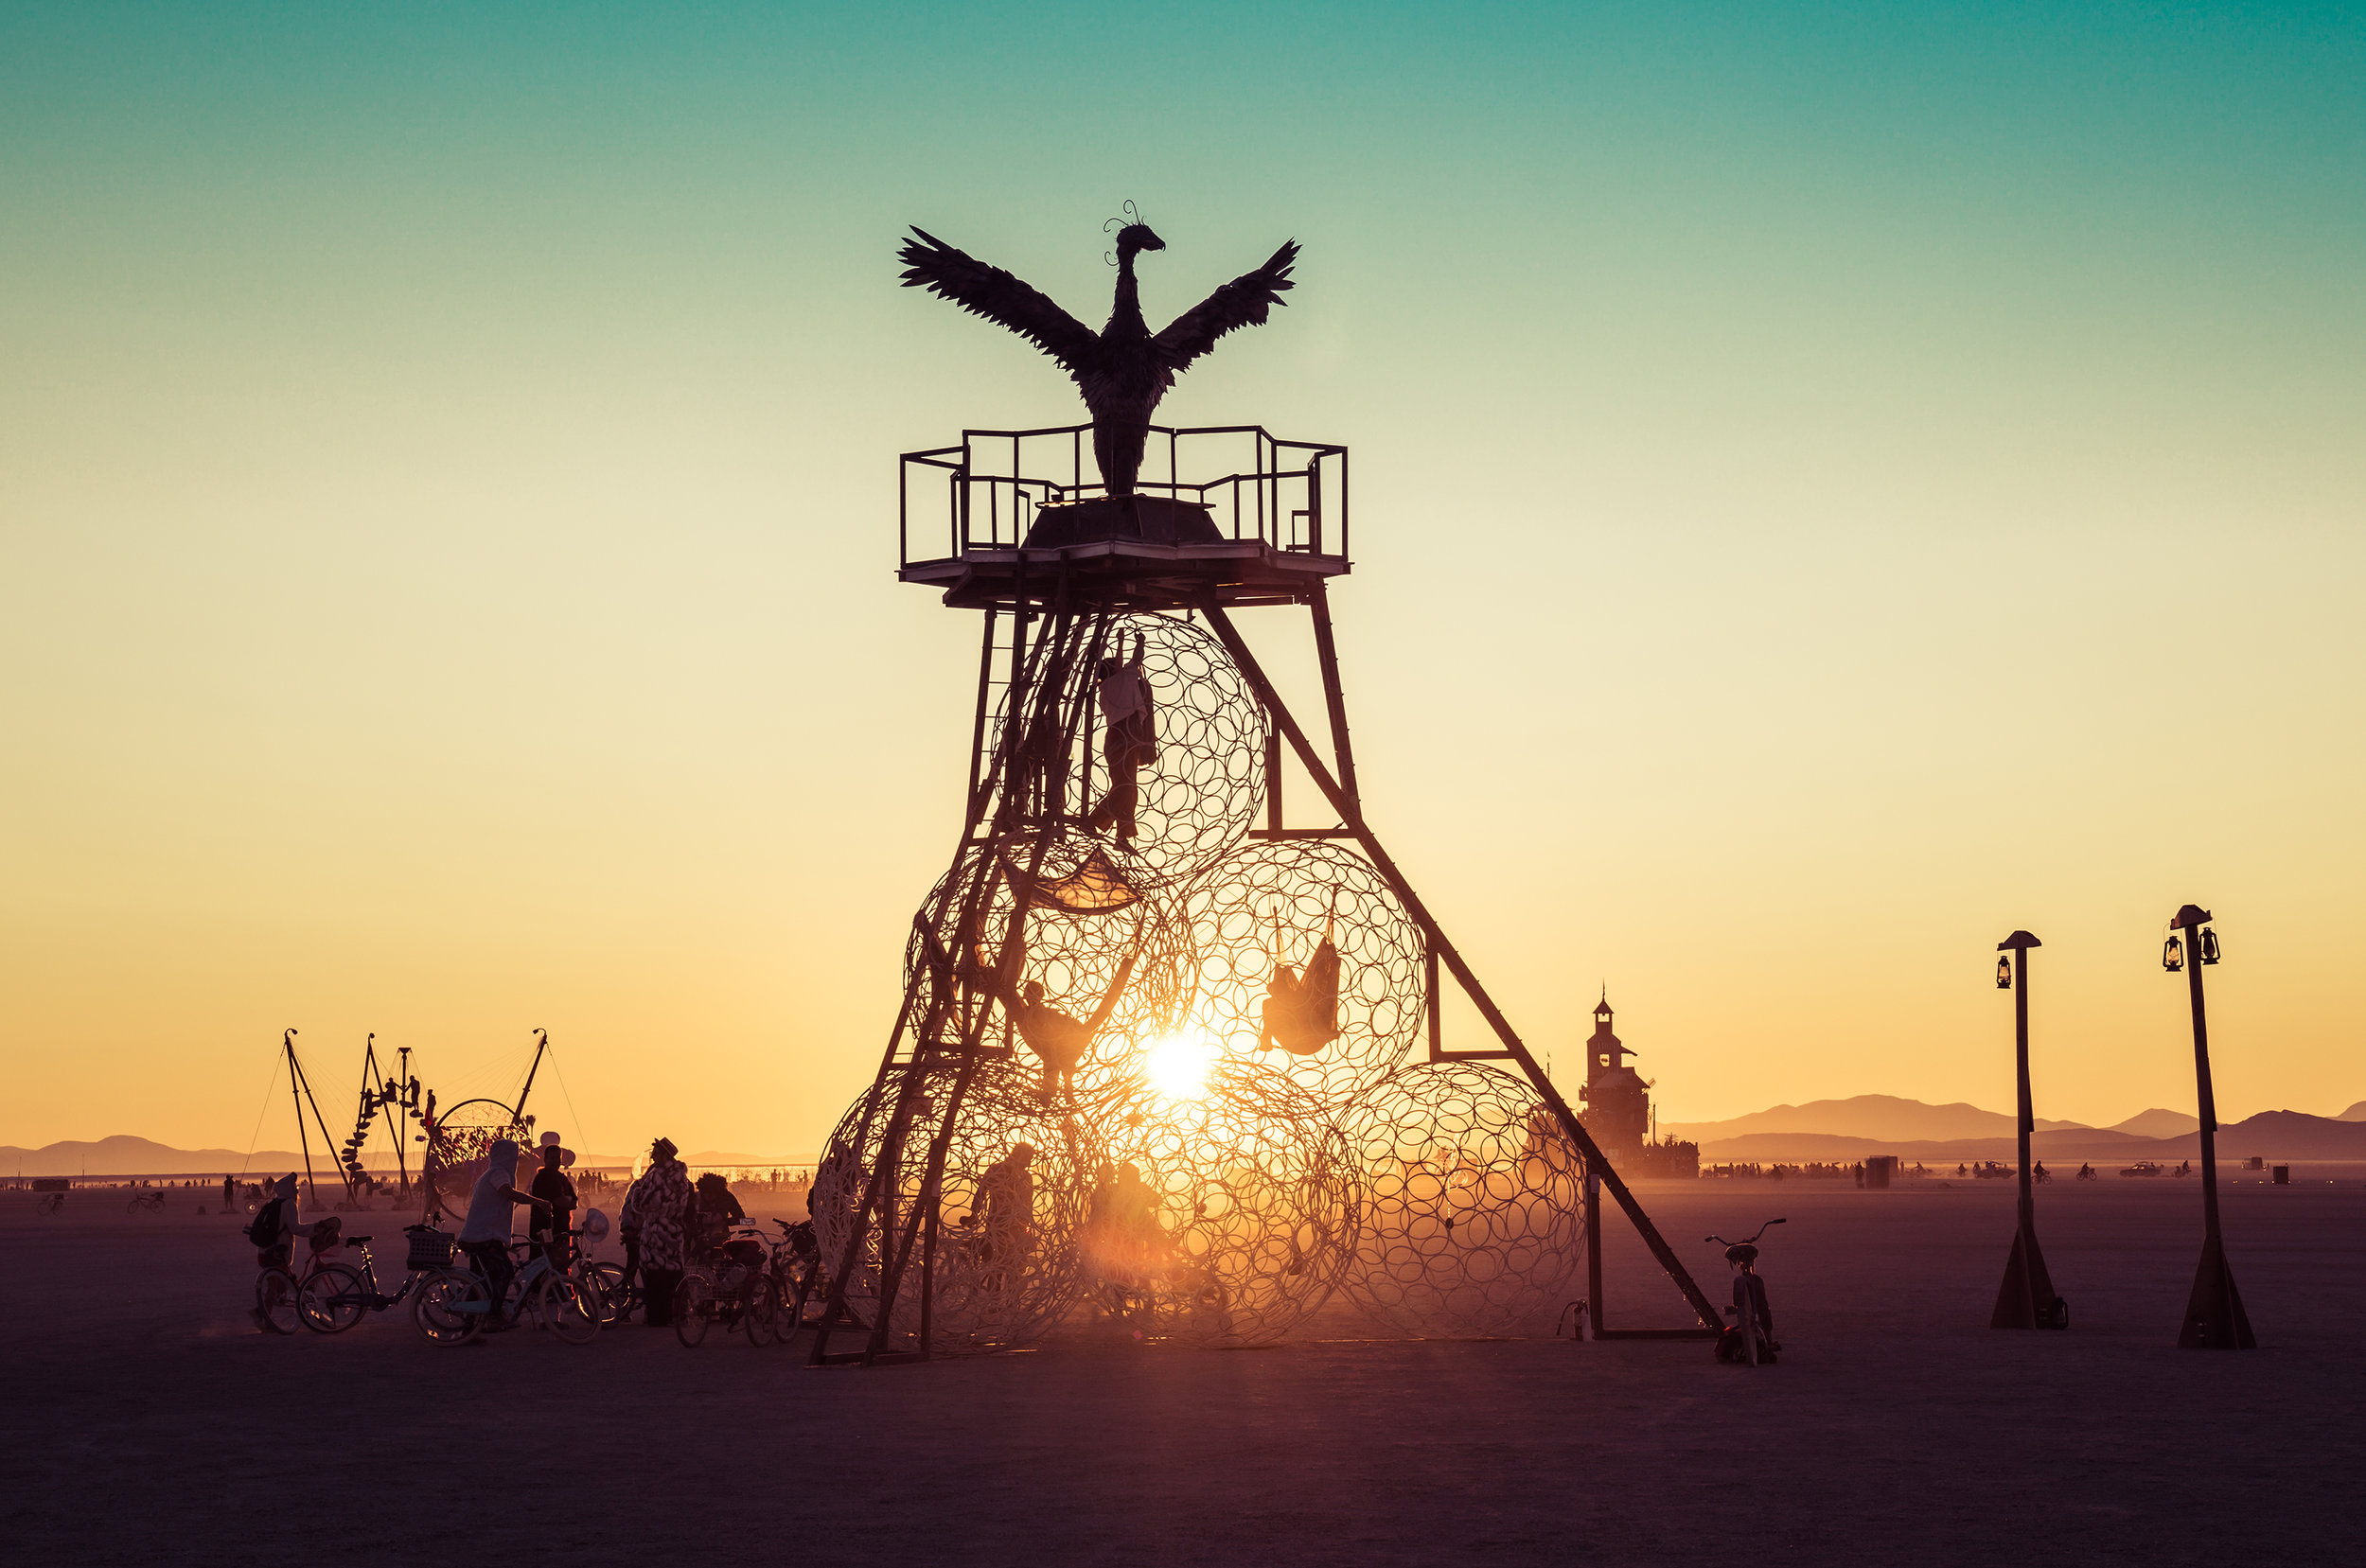 Burning Man 2019 - The Butterfly and the Pheonix